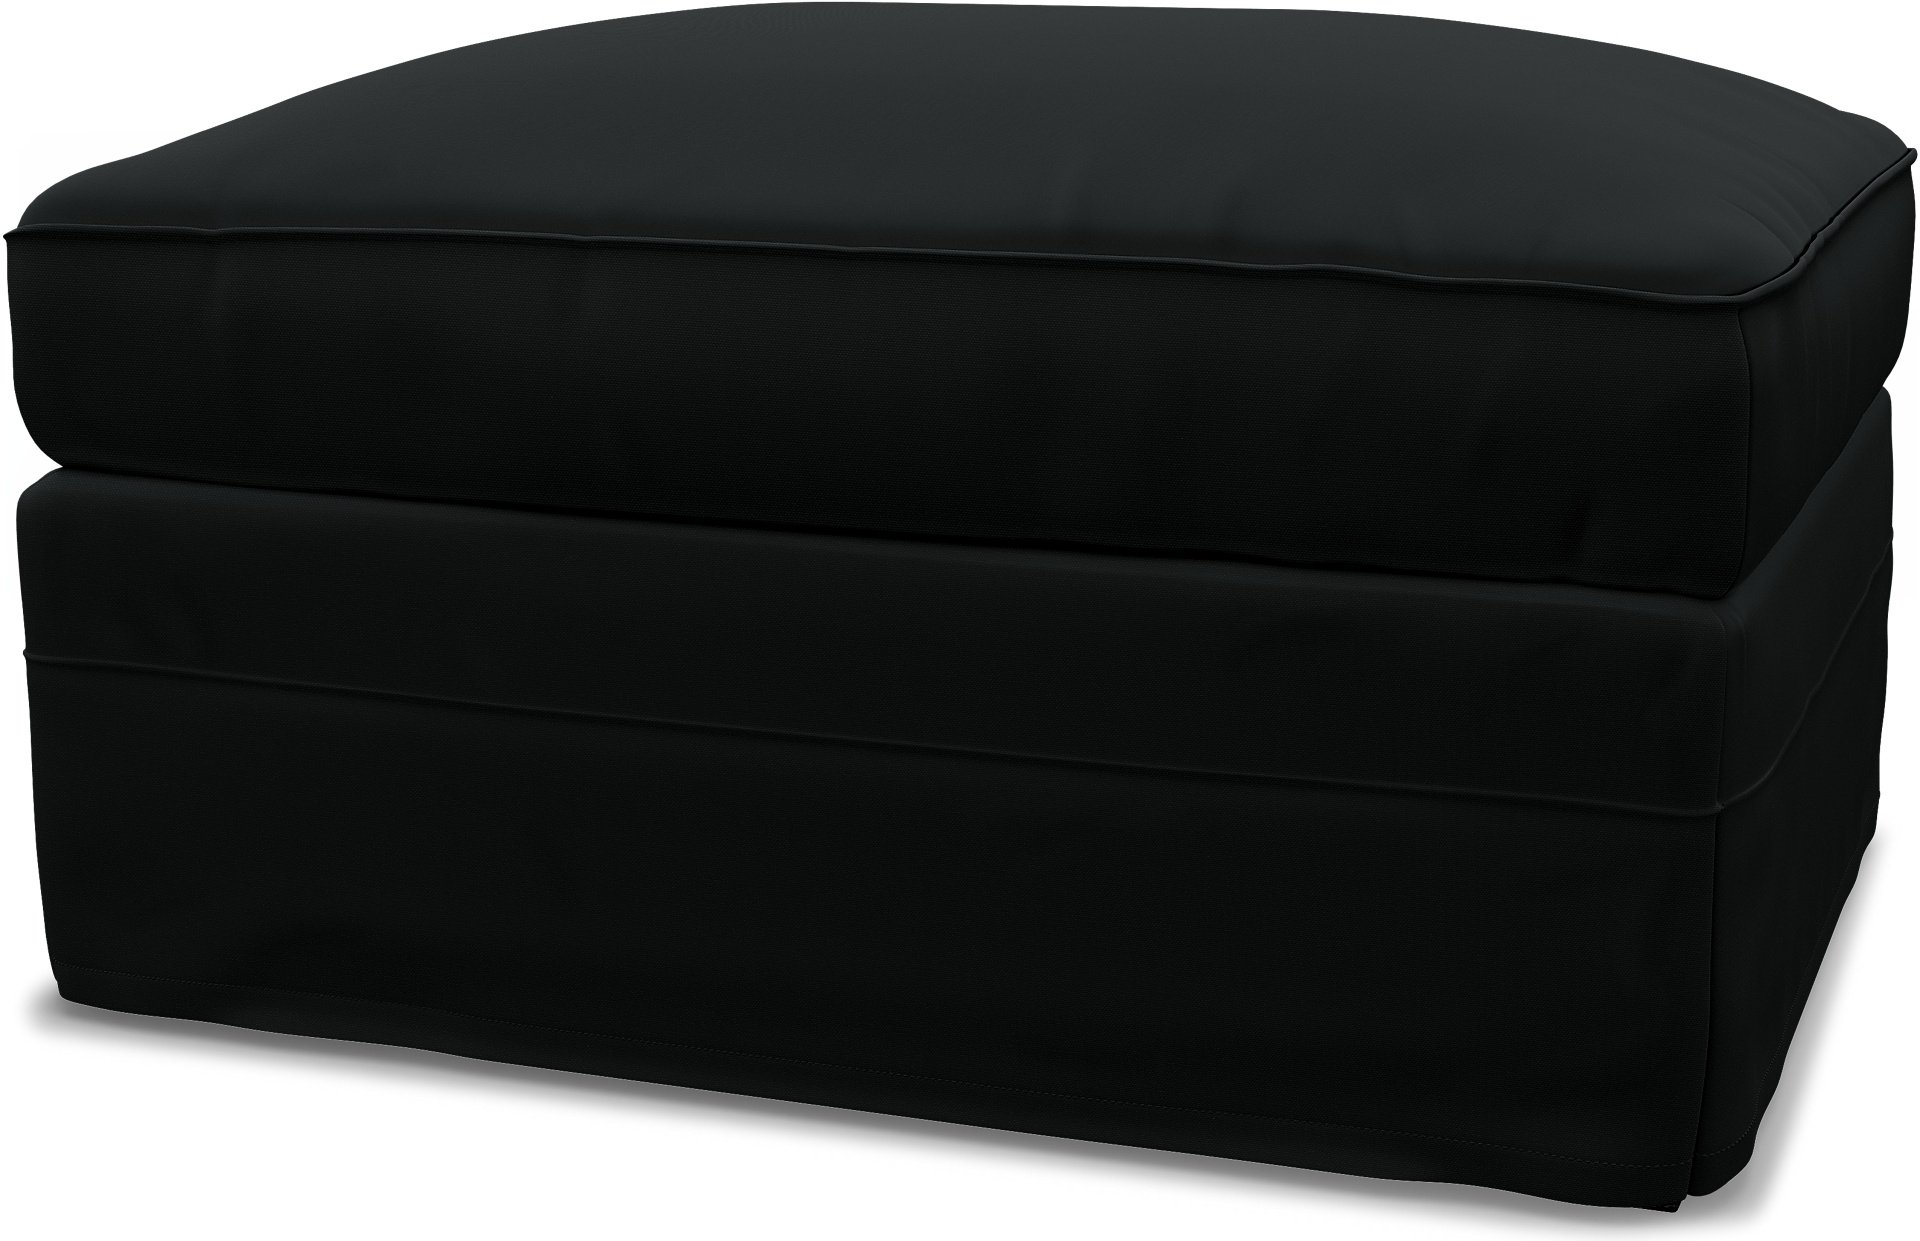 IKEA - Gronlid Footstool with Storage Cover, Jet Black, Cotton - Bemz